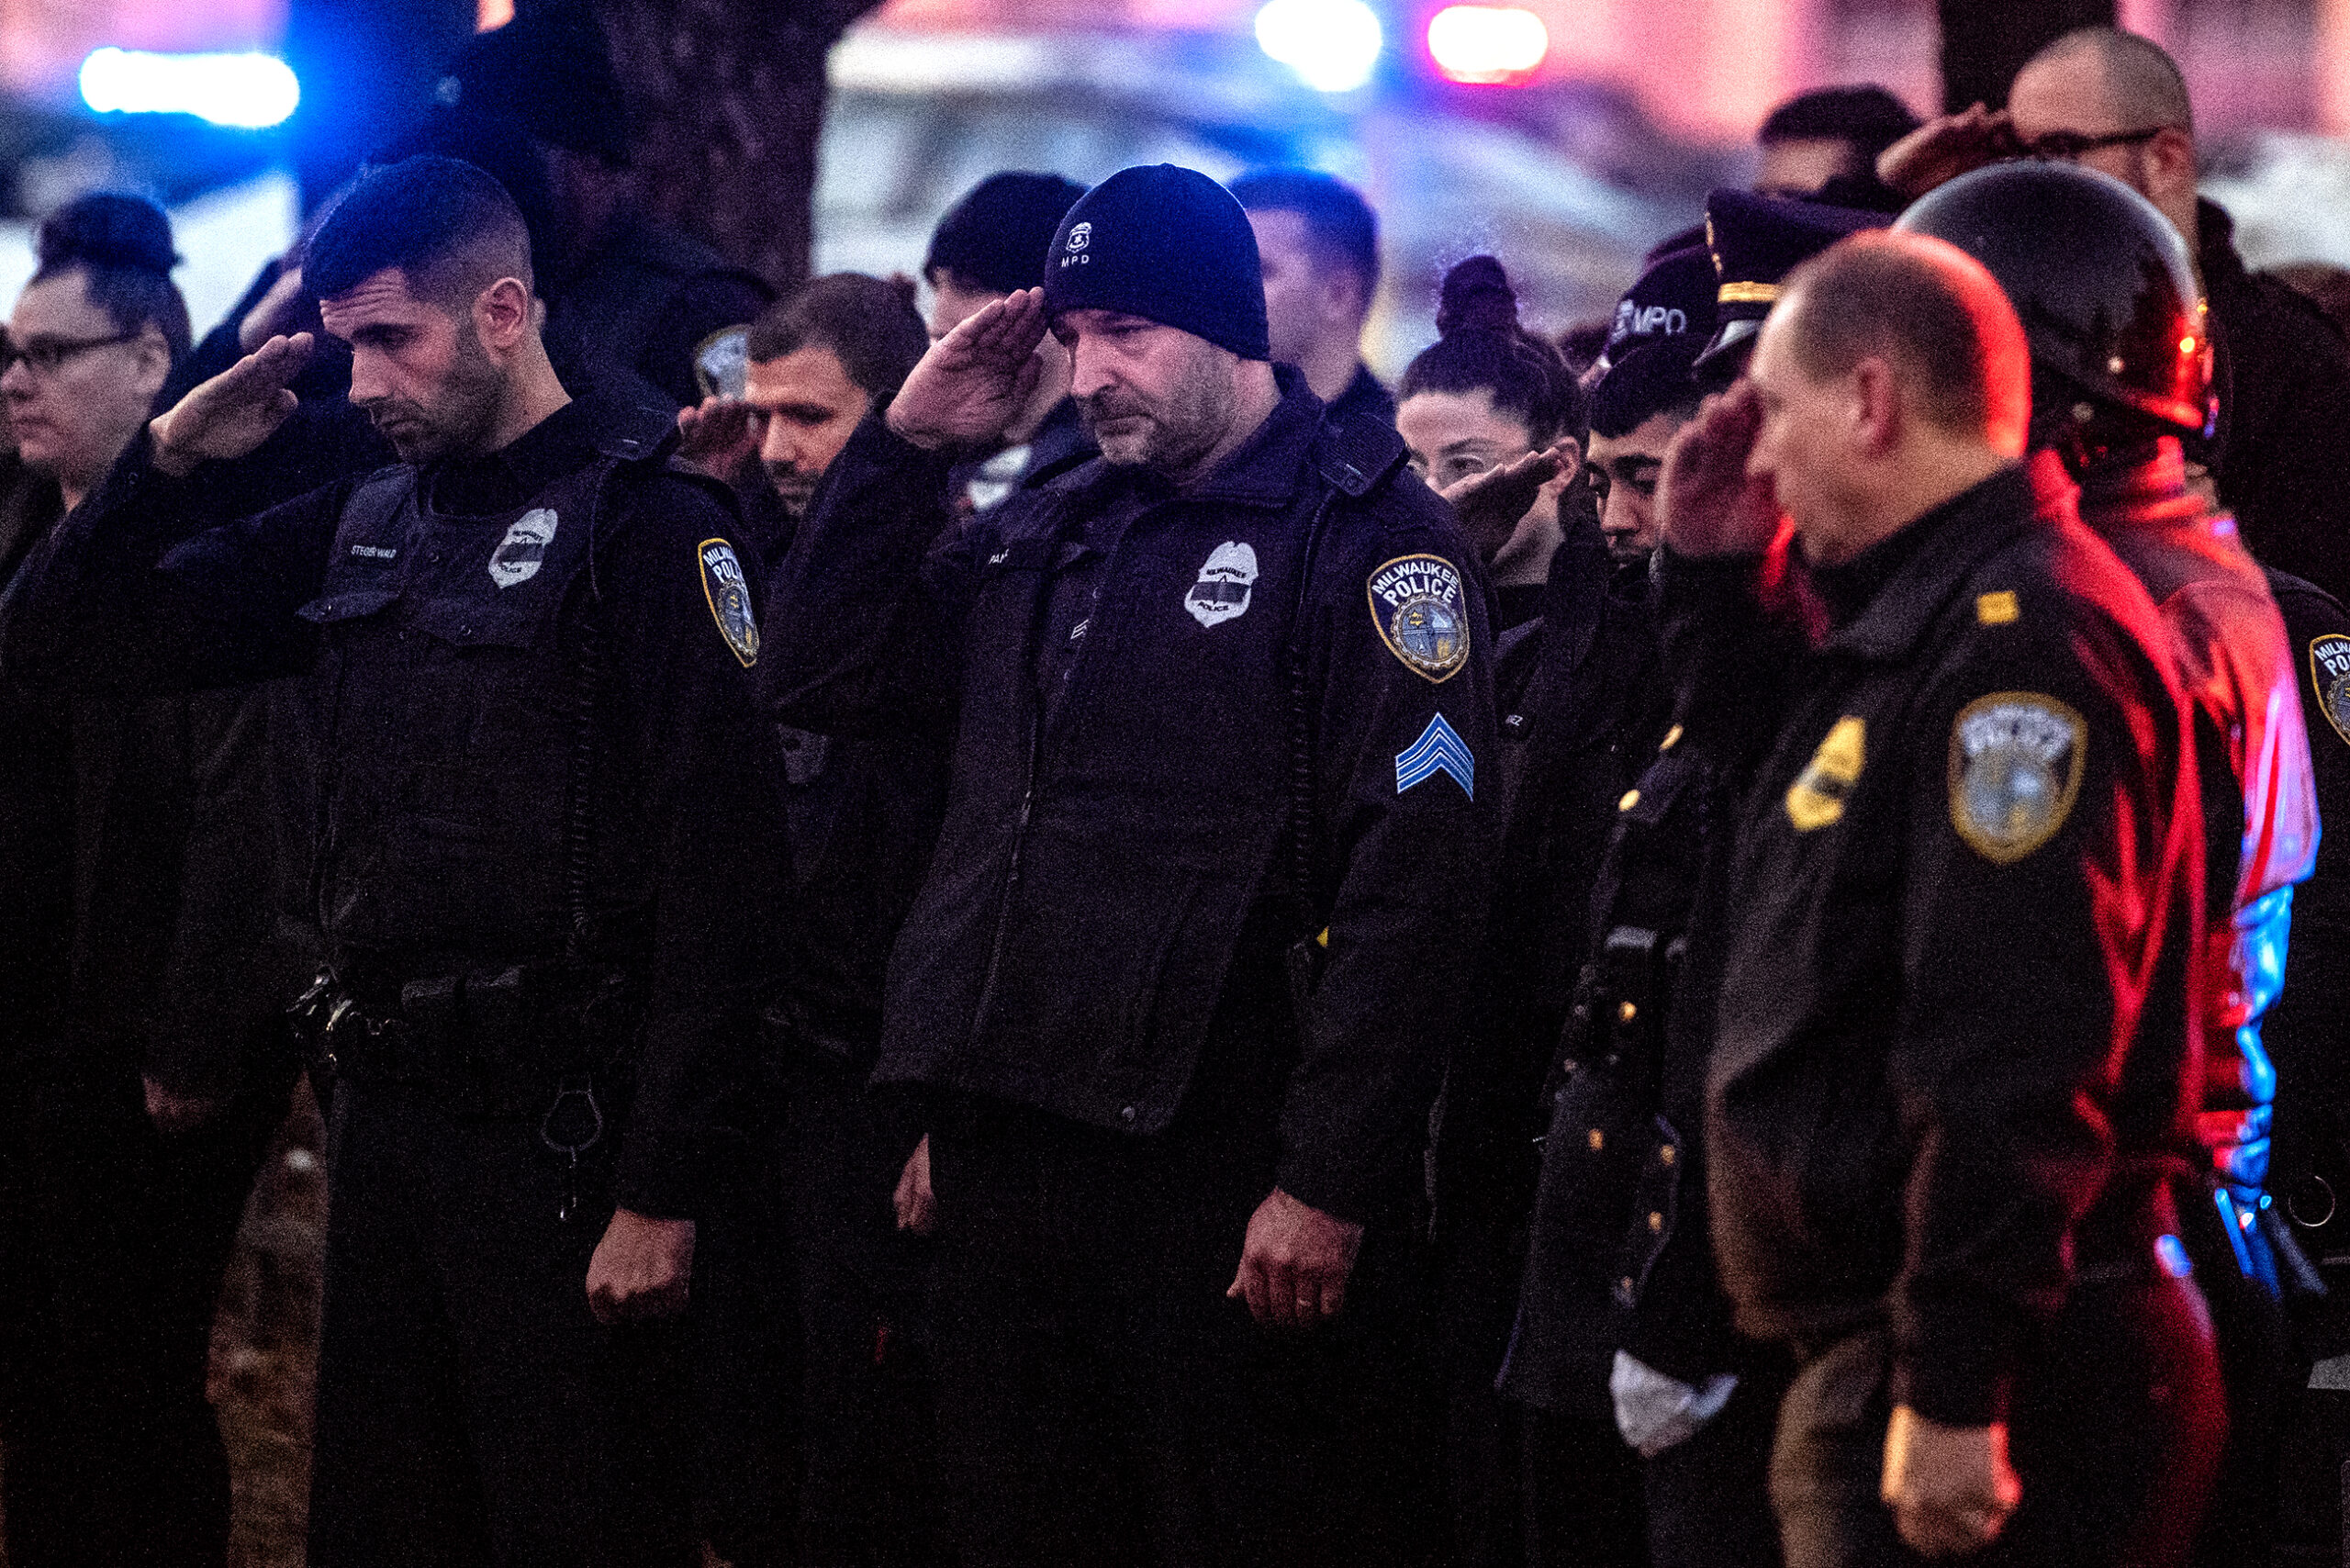 A line of police officers in uniform hold their hands up to salute. Police lights can be seen in the background.